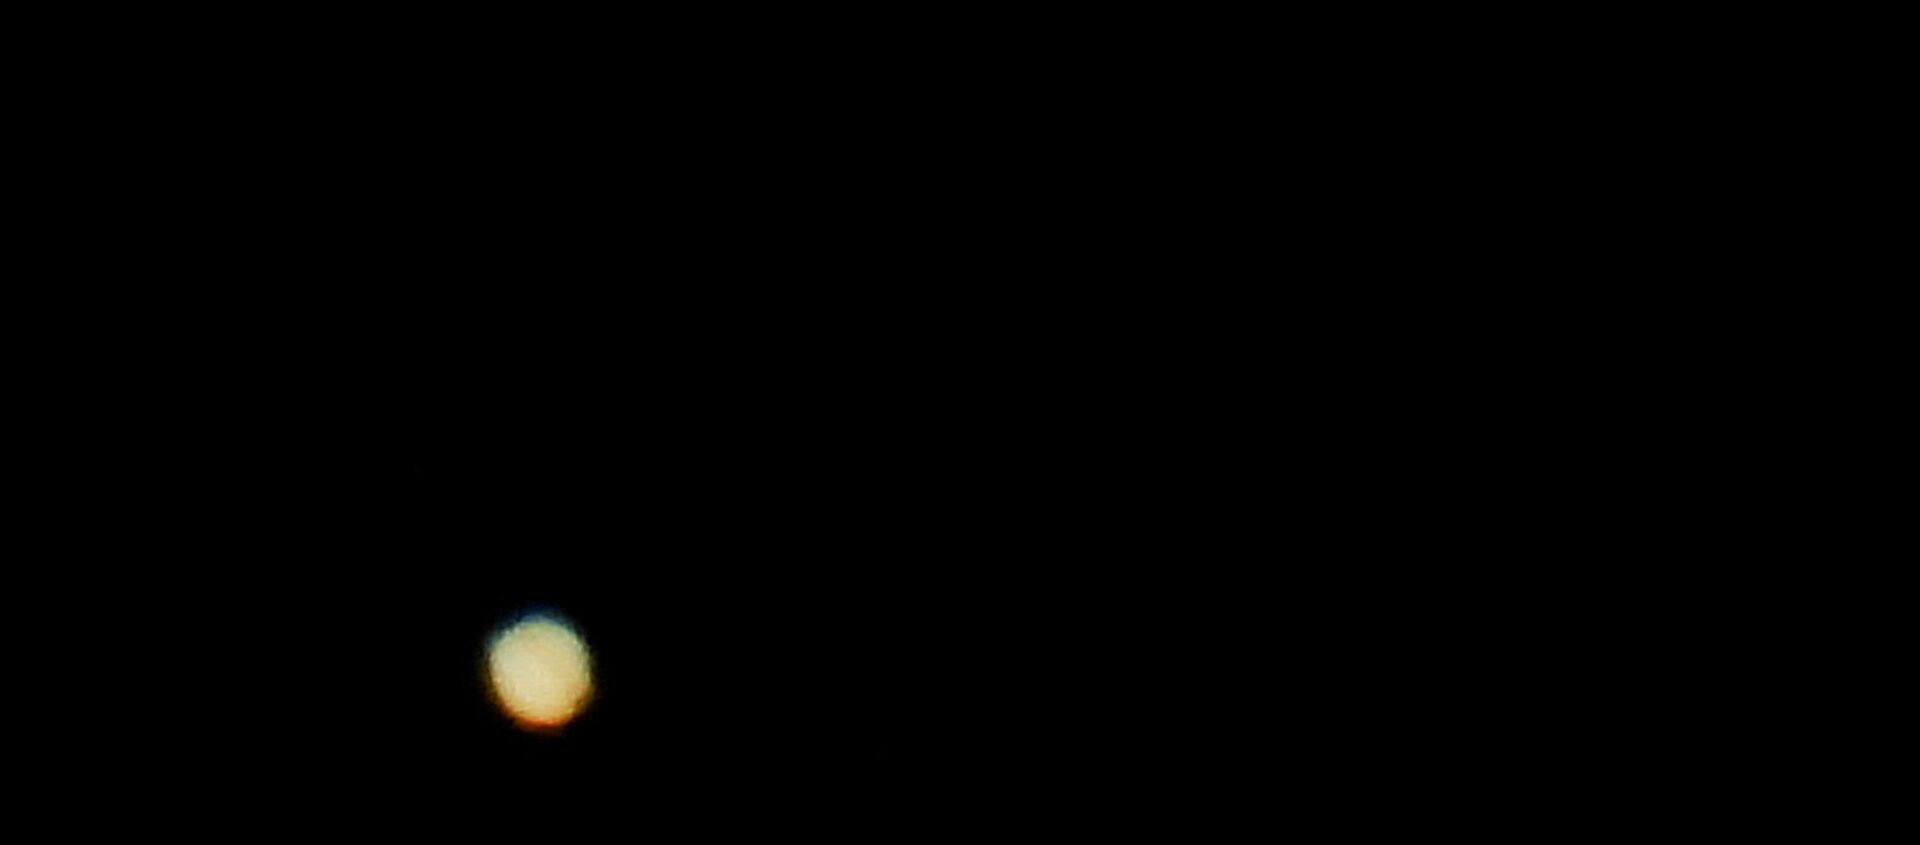 Jupiter (below) and Saturn (above) are pictured on the sky during the closest visible conjunction of them in 400 years, in La Linea de la Concepcion, southern Spain December 21, 2020 - Sputnik International, 1920, 21.12.2020